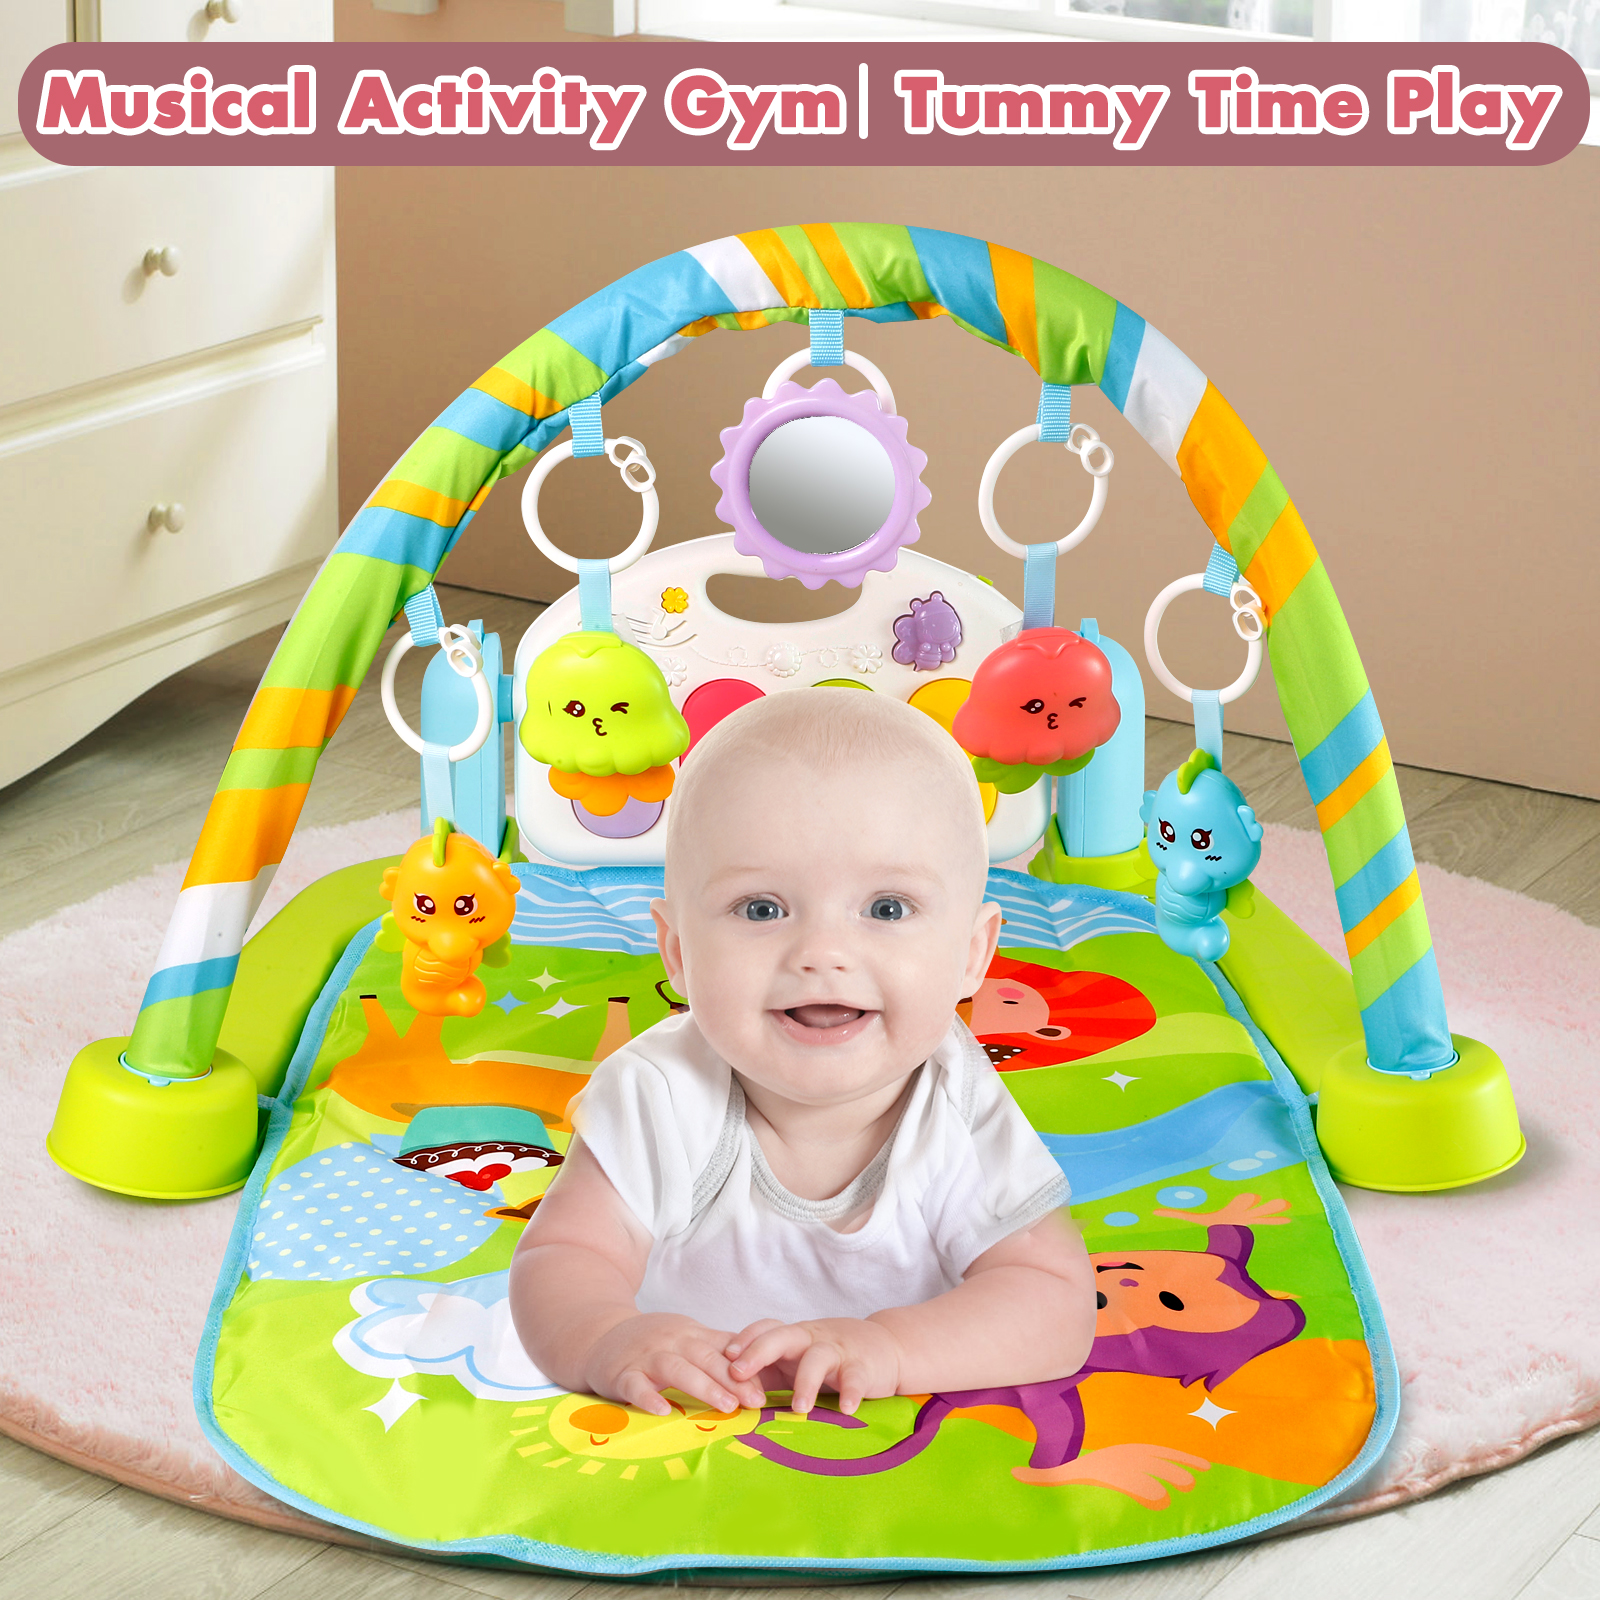 Baby Play Mat Baby Gym Funny Play Piano Tummy Time Baby Activity Gym Mat with 5 Infant Learning Sensory Baby Toys, Music and Lights Boy & Girl Gifts for Newborn Baby 0 to 3 6 9 12 Months - image 3 of 7